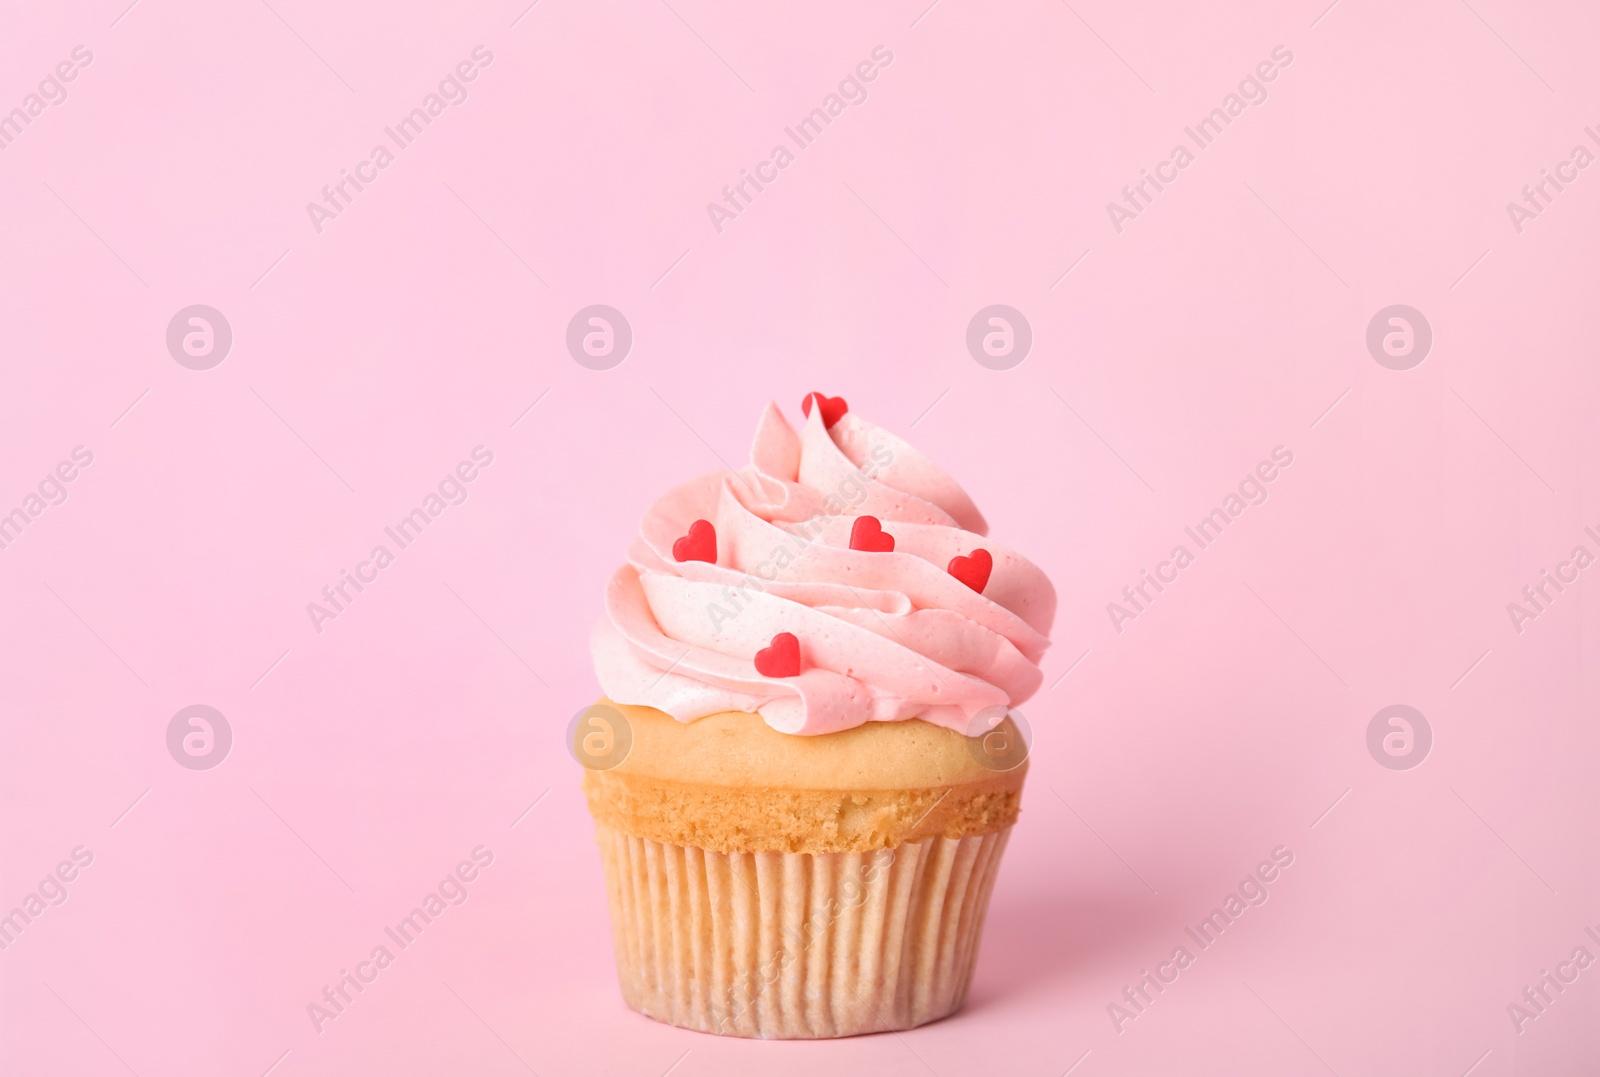 Photo of Tasty cupcake with heart shaped sprinkles for Valentine's Day on pink background